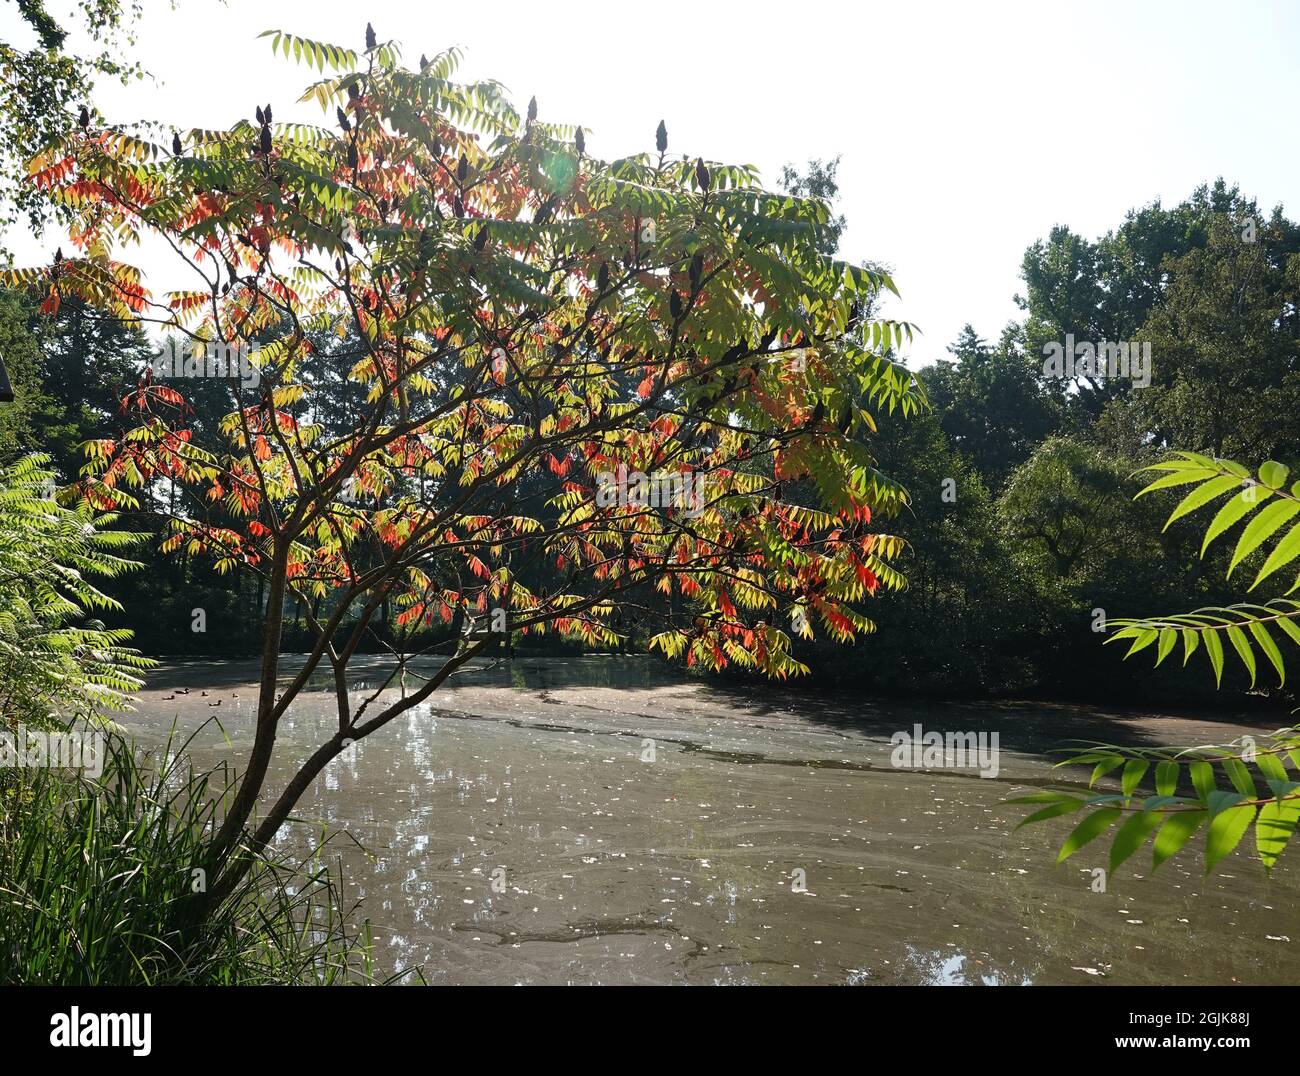 A Rhus typhina or staghorn sumac tree standing in front of a lake. The tree begins to adorn itself in autumn colors in September. Stock Photo